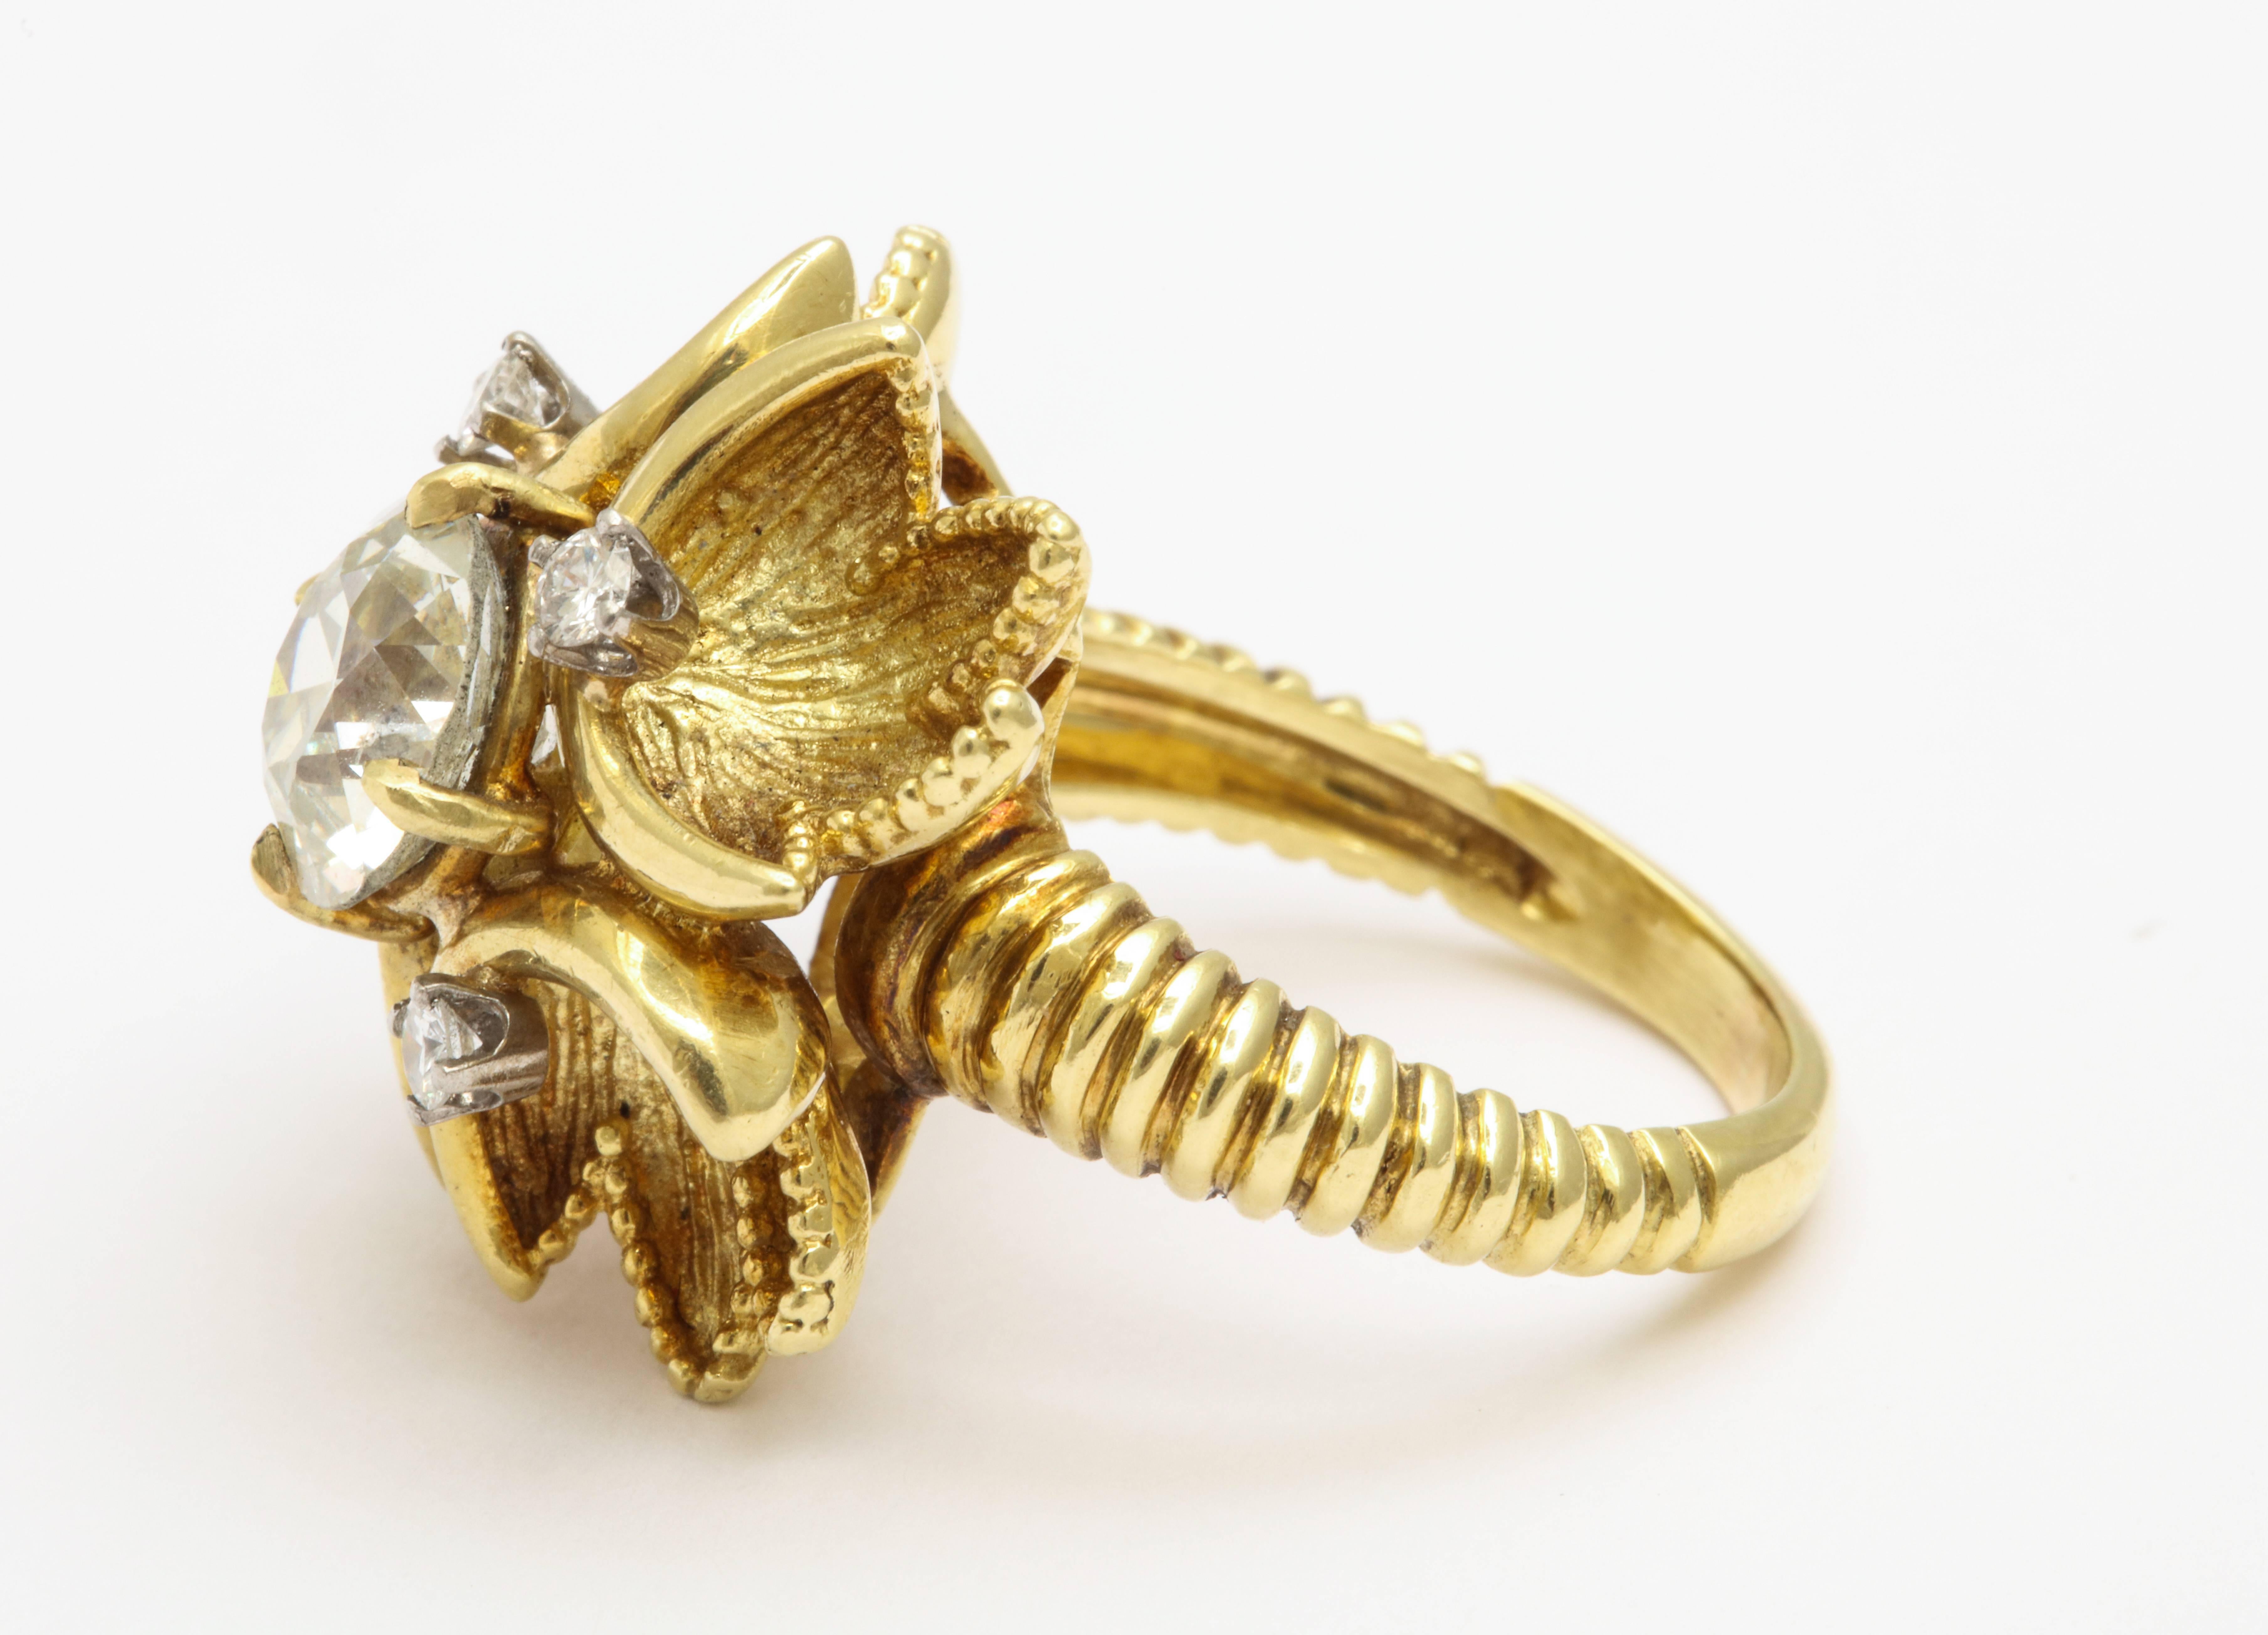 Retro Era 18K Yellow Gold Cartier Diamond Cocktail Ring In Excellent Condition For Sale In New York, NY